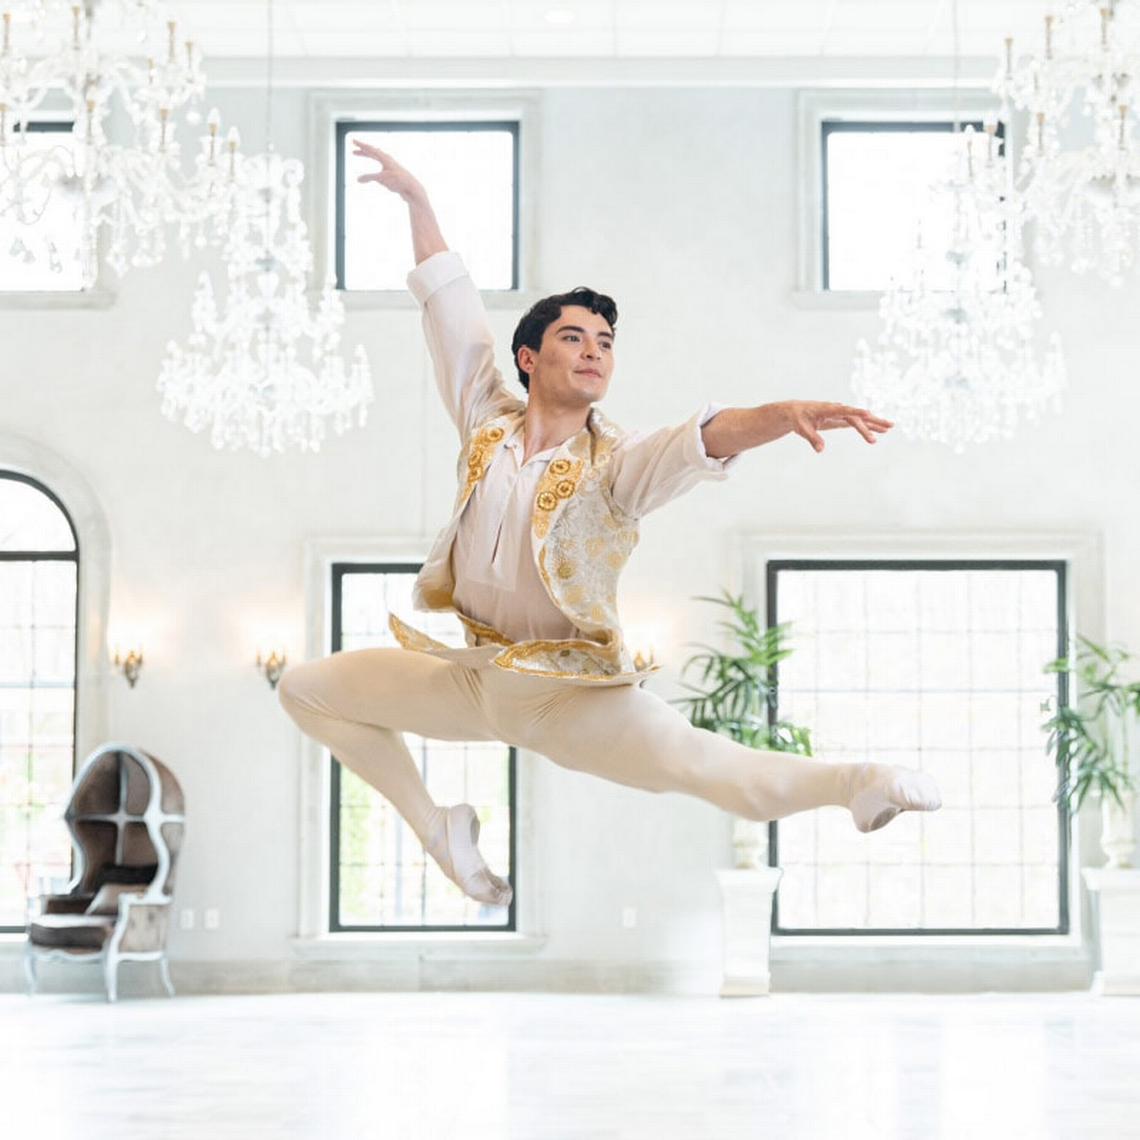 Ballet Idaho opens its 50th anniversary season with “Mozart in Motion,” featuring Balanchine’s “Divertimento No. 15.” Pictured: Dancer Jacob Beasley.